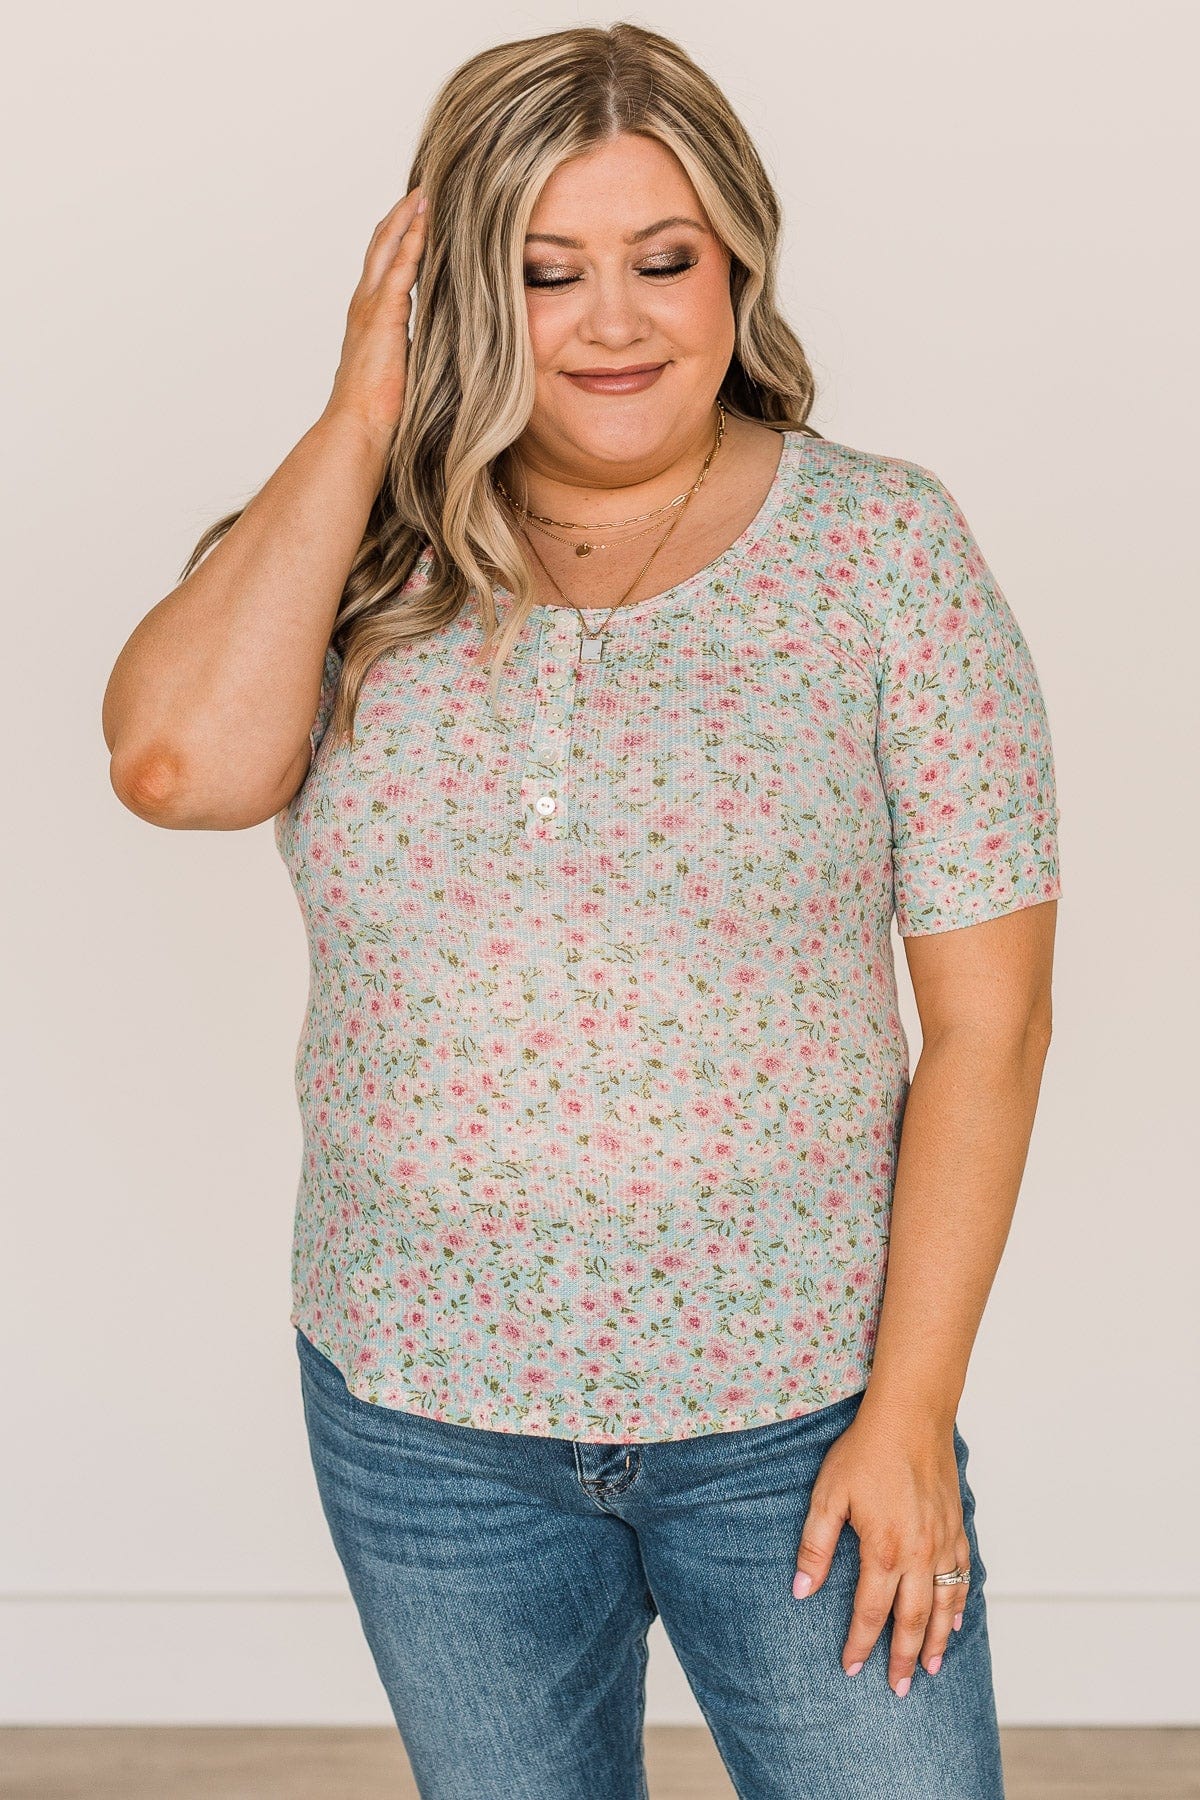 Dream On Floral Button Top- Mint Blue & Pink